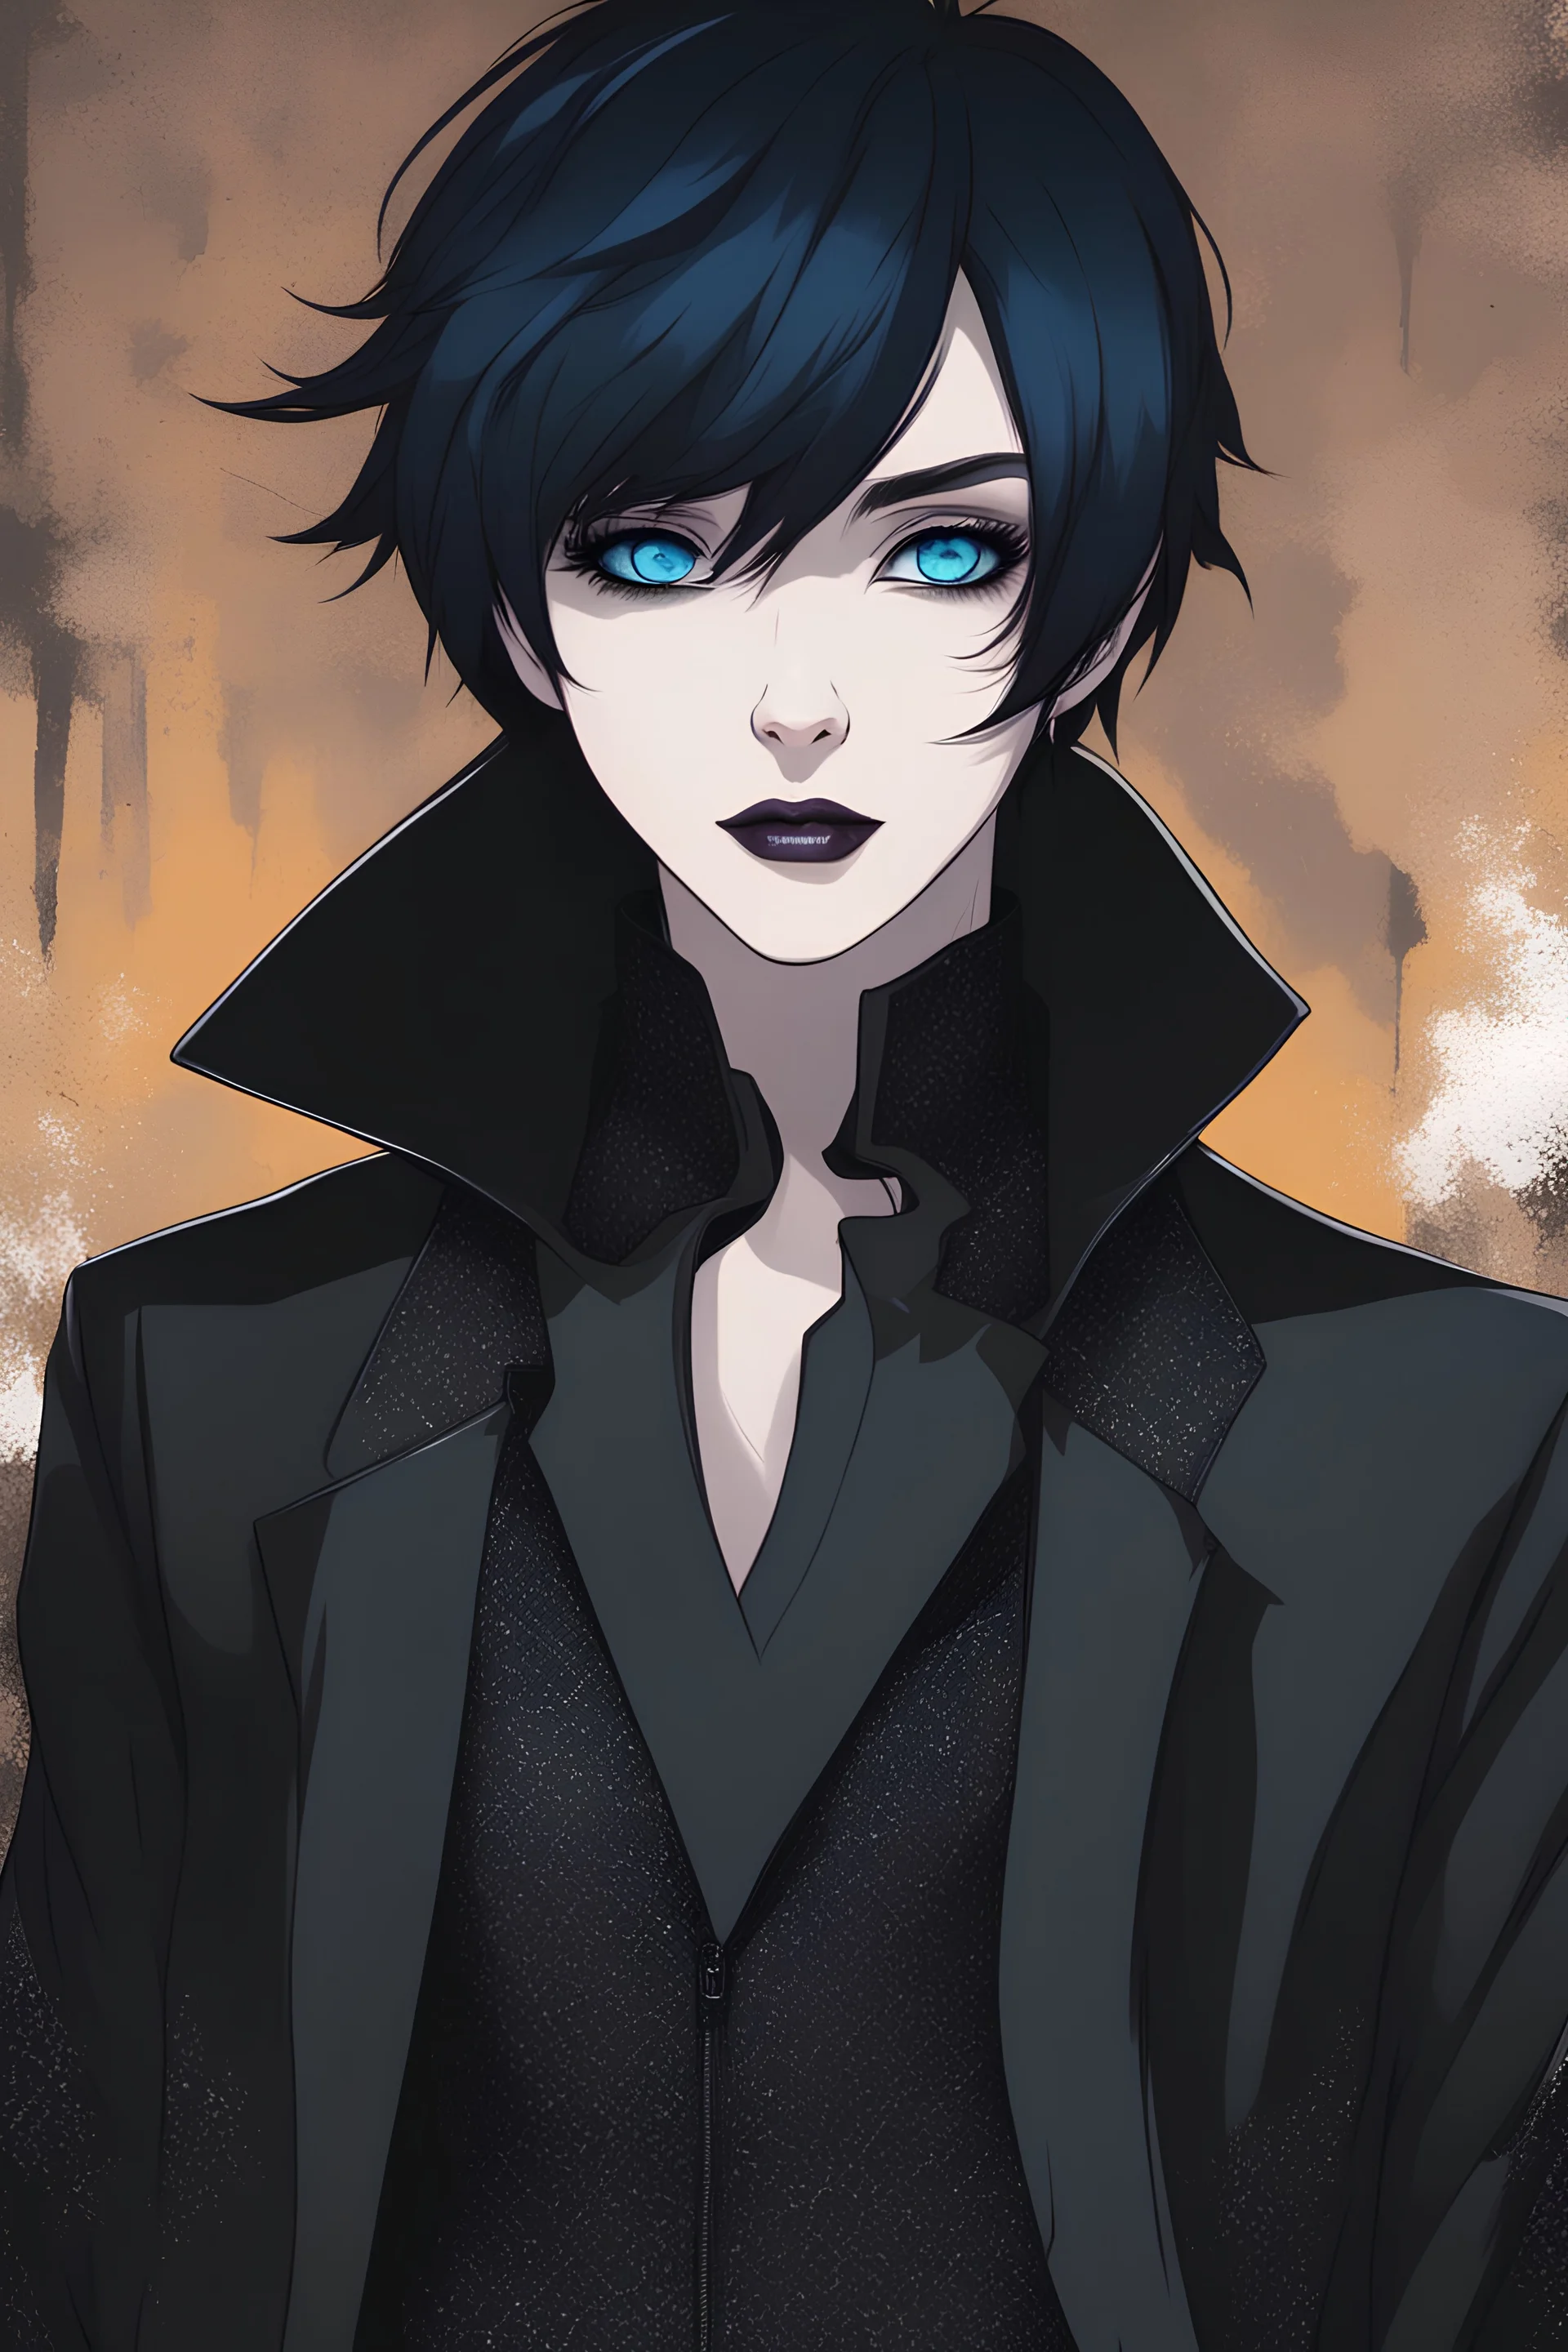 Thin, androgynous character with short black hair. vivid sapphire blue eyes, goth makeup, dark gender neutral goth clothes, urban background, RWBY animation style